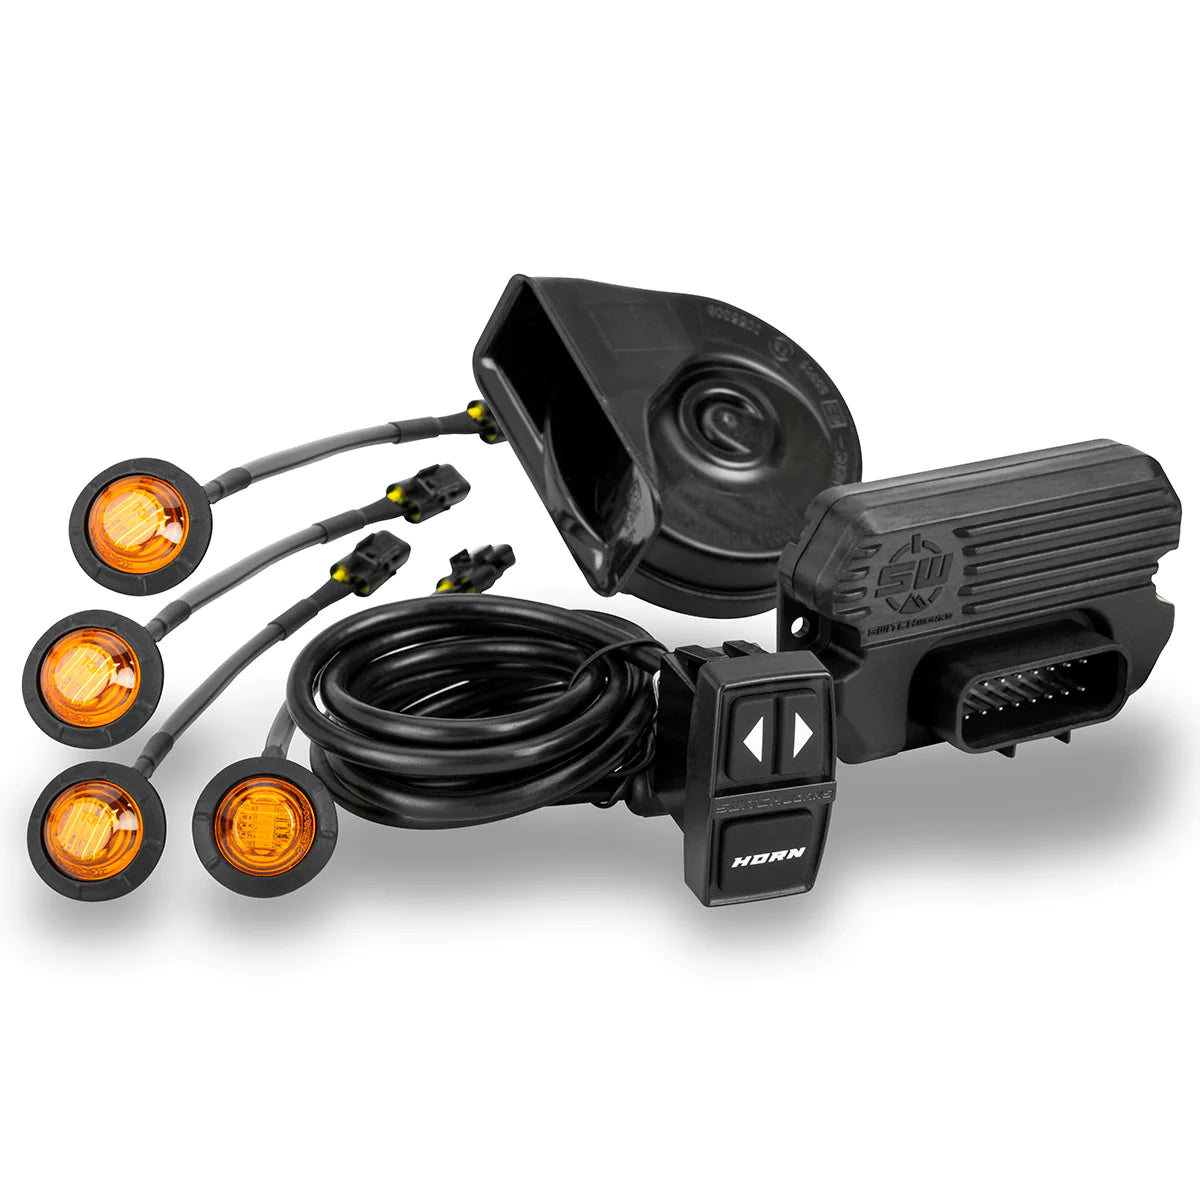 Tango2 Universal Turn-Signal Kit with All-In-One Controller